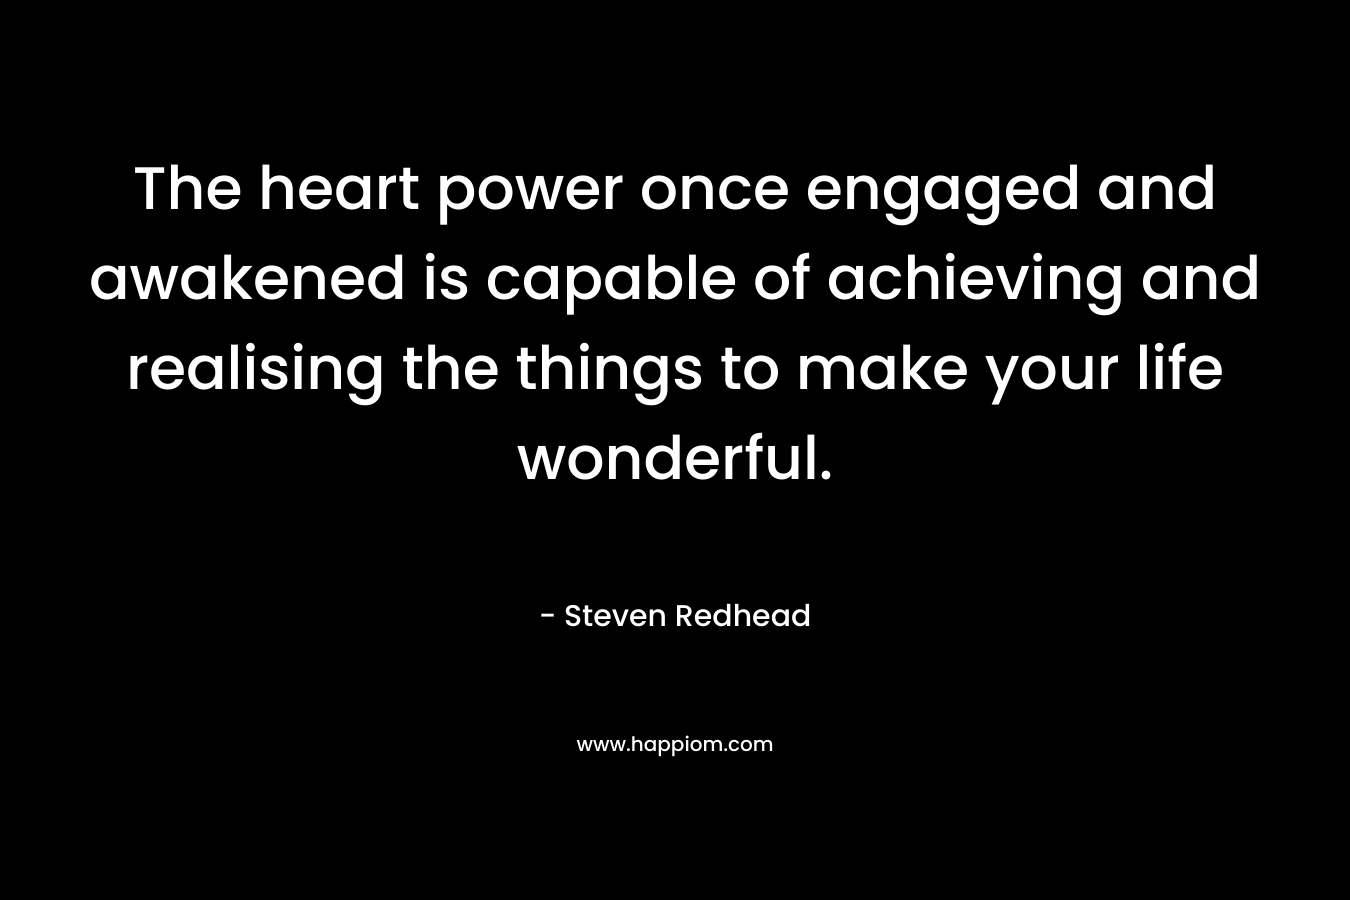 The heart power once engaged and awakened is capable of achieving and realising the things to make your life wonderful.